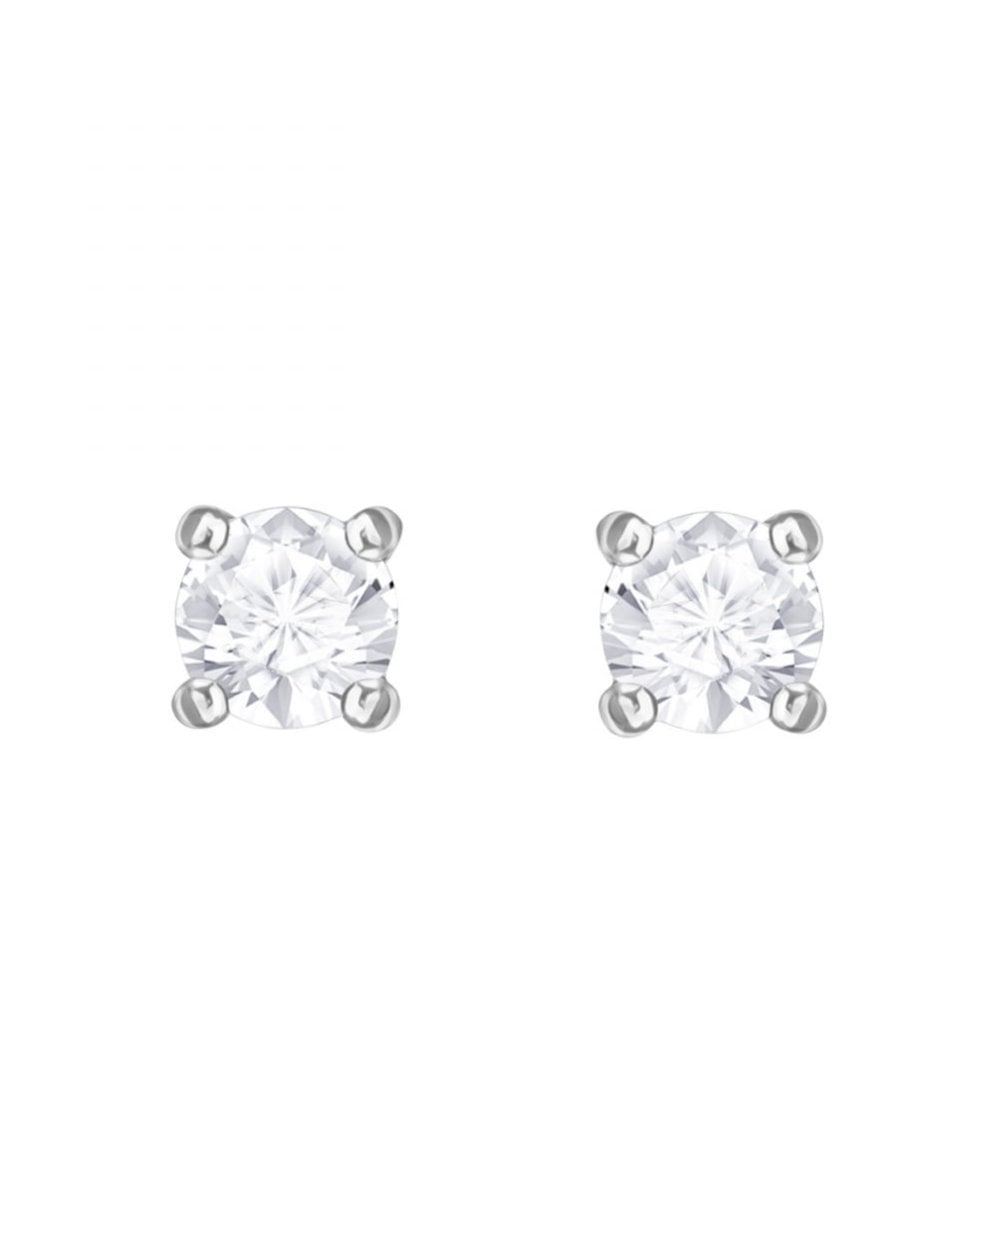 Attract Pierced Stud Earrings in Clear Crystal and Rhodium Plate